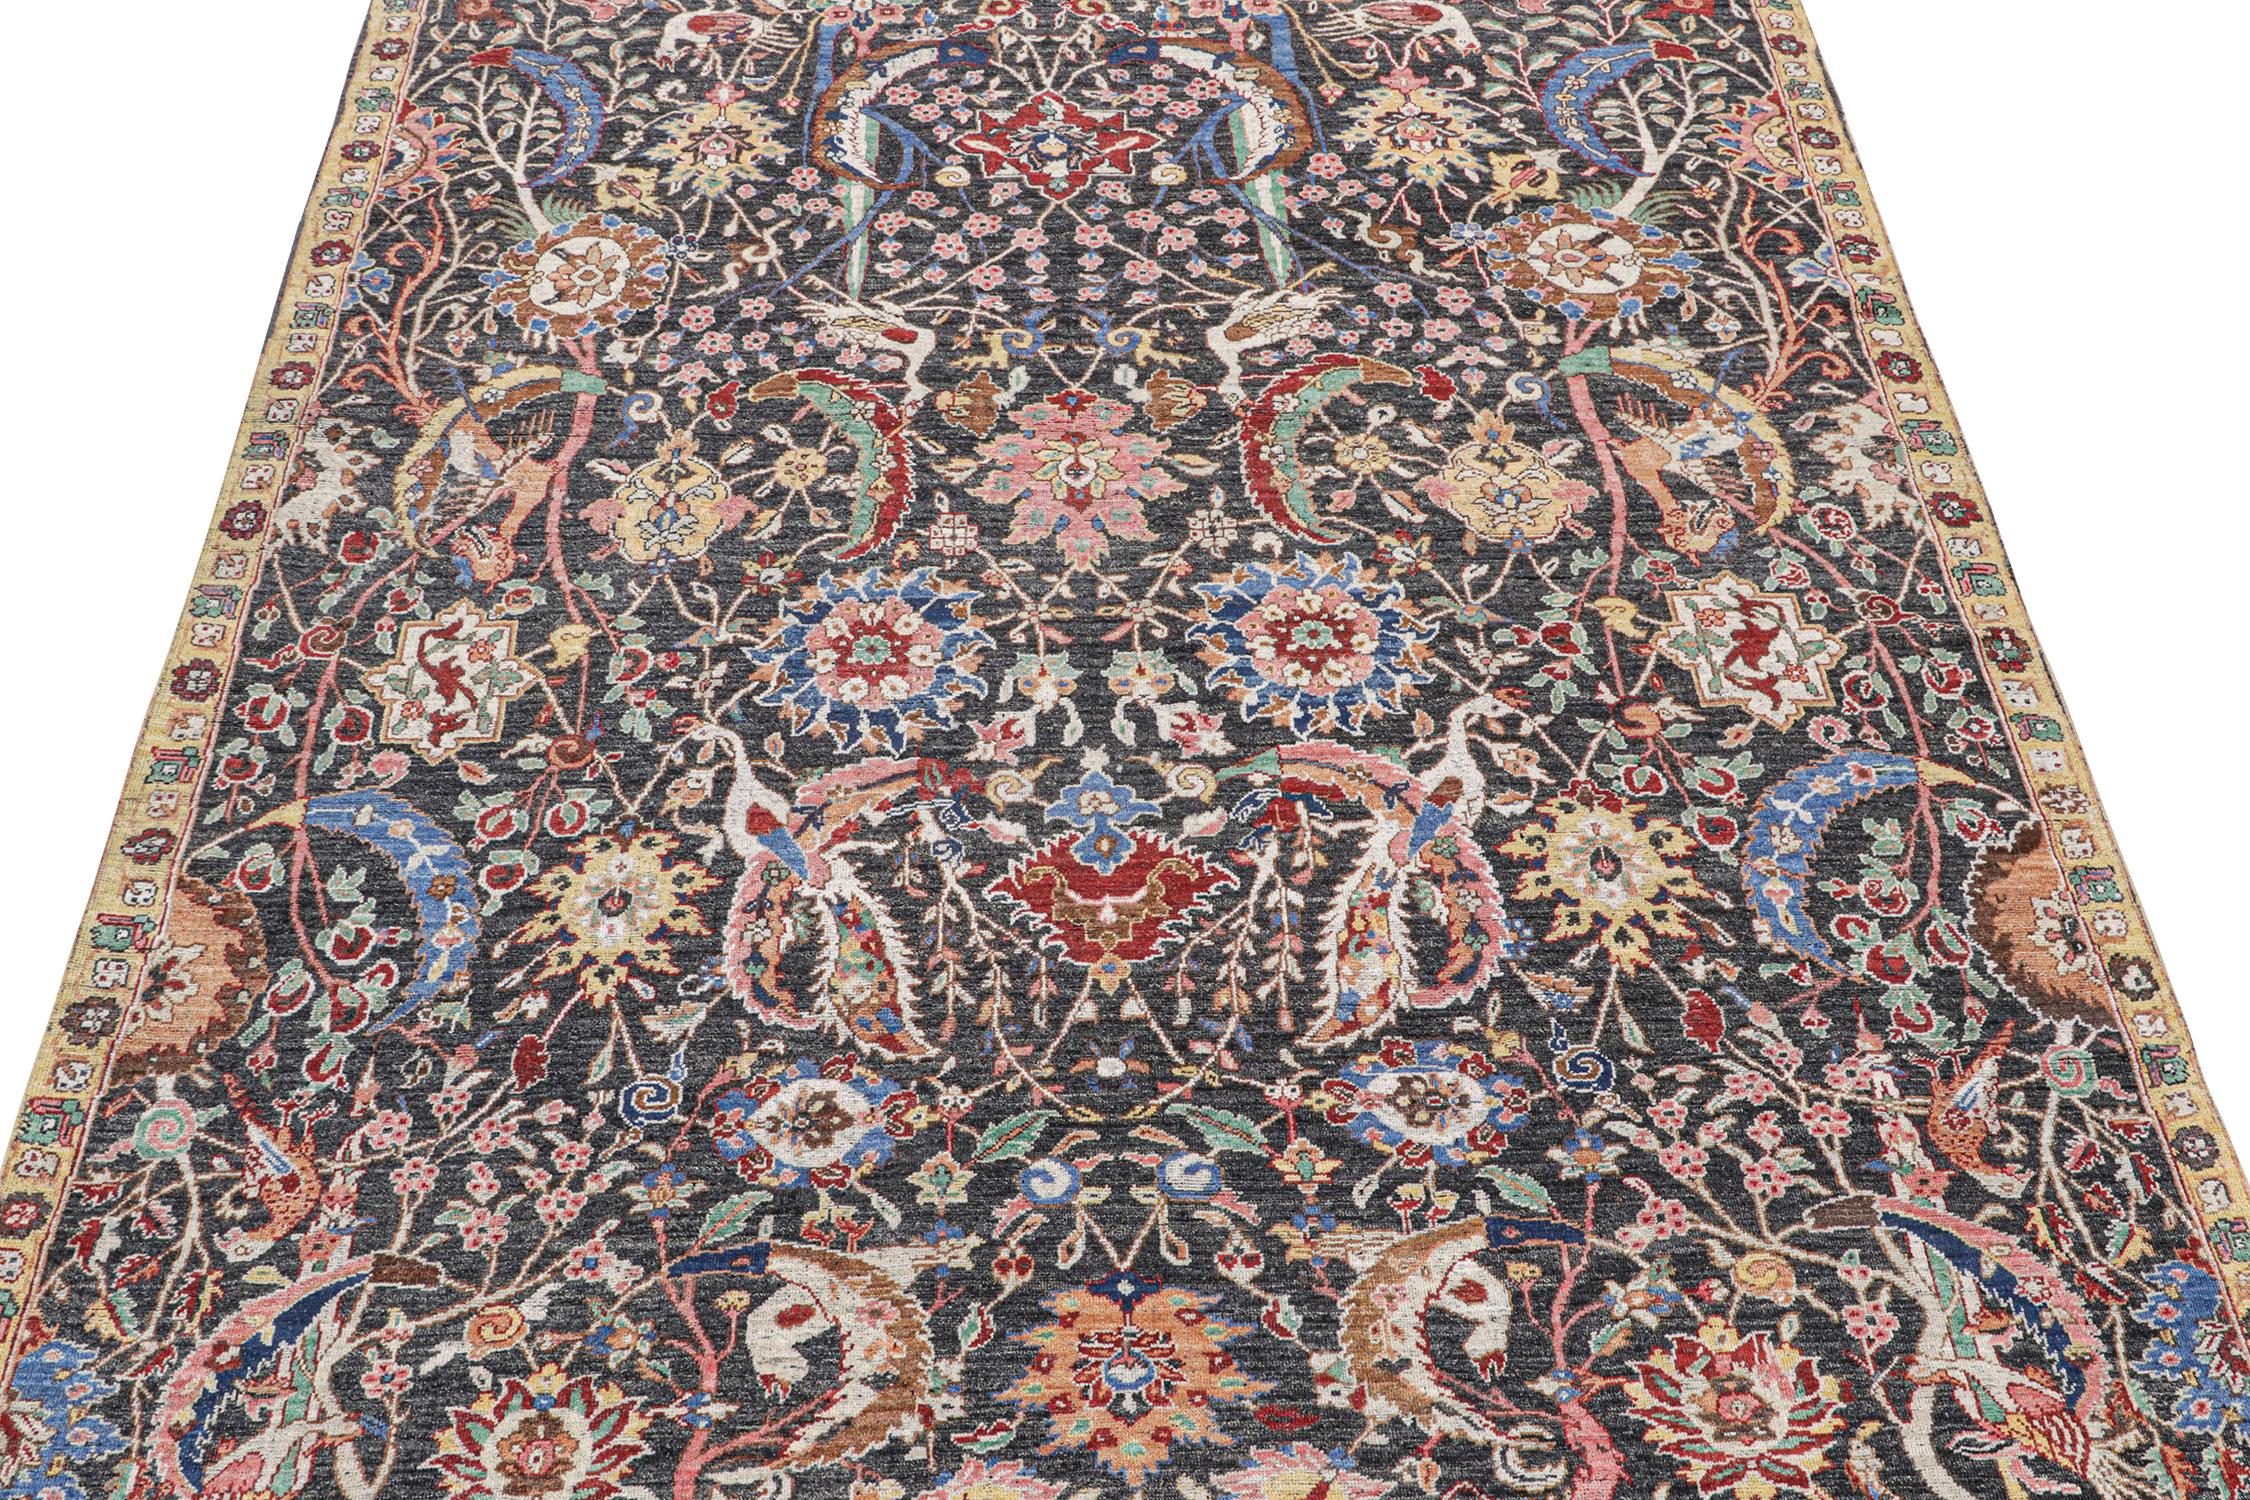 This contemporary 9x12 rug is a grand new entry to Rug & Kilim’s custom classics Burano Collection.

Hand knotted in wool, this design is inspired by 17th century antique Persian rugs of the Kerman province. This particular style was often called